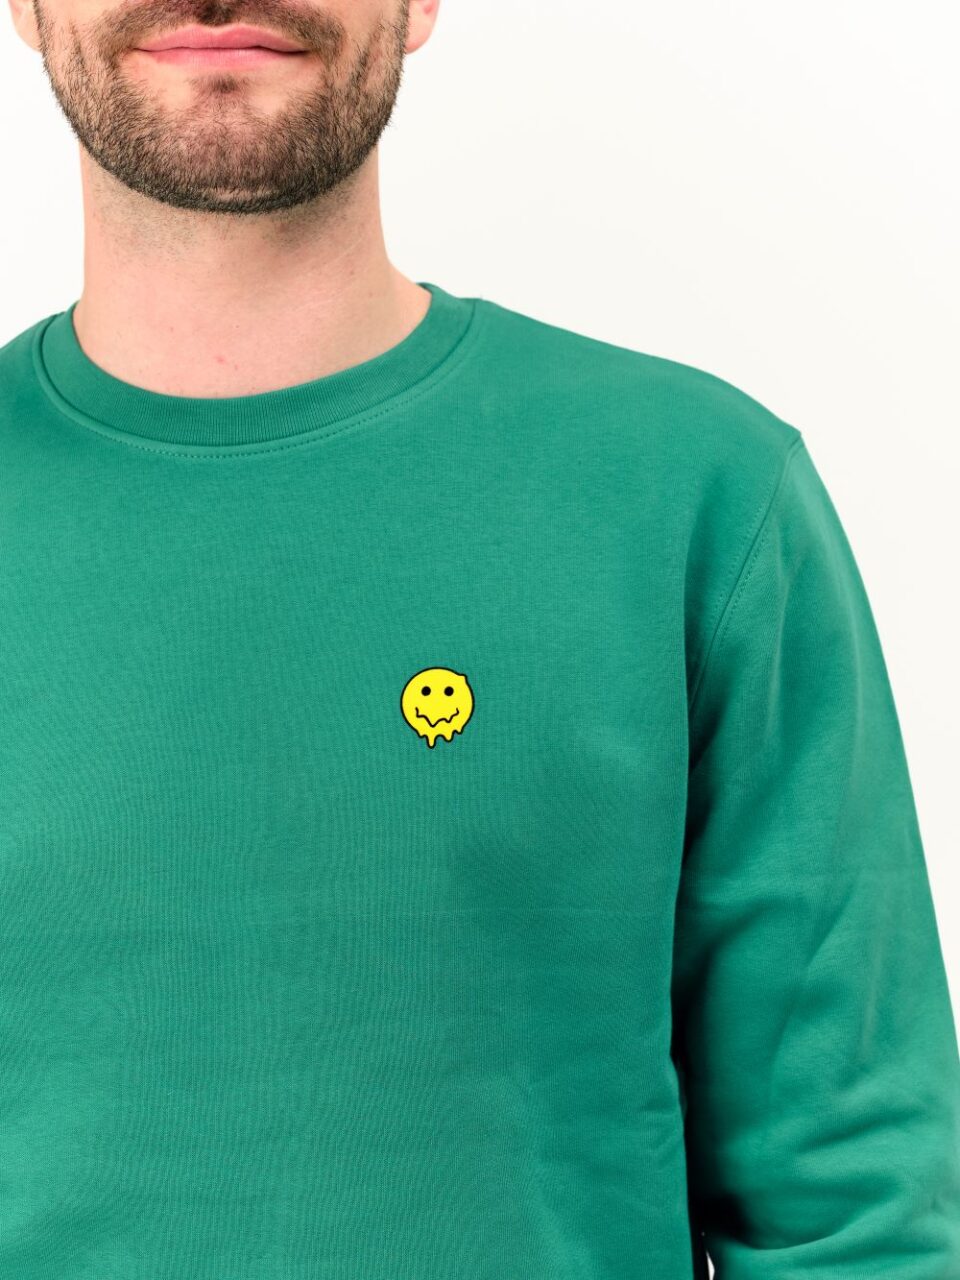 Vivid Green-Smiley-Sweater-STROM Clothing